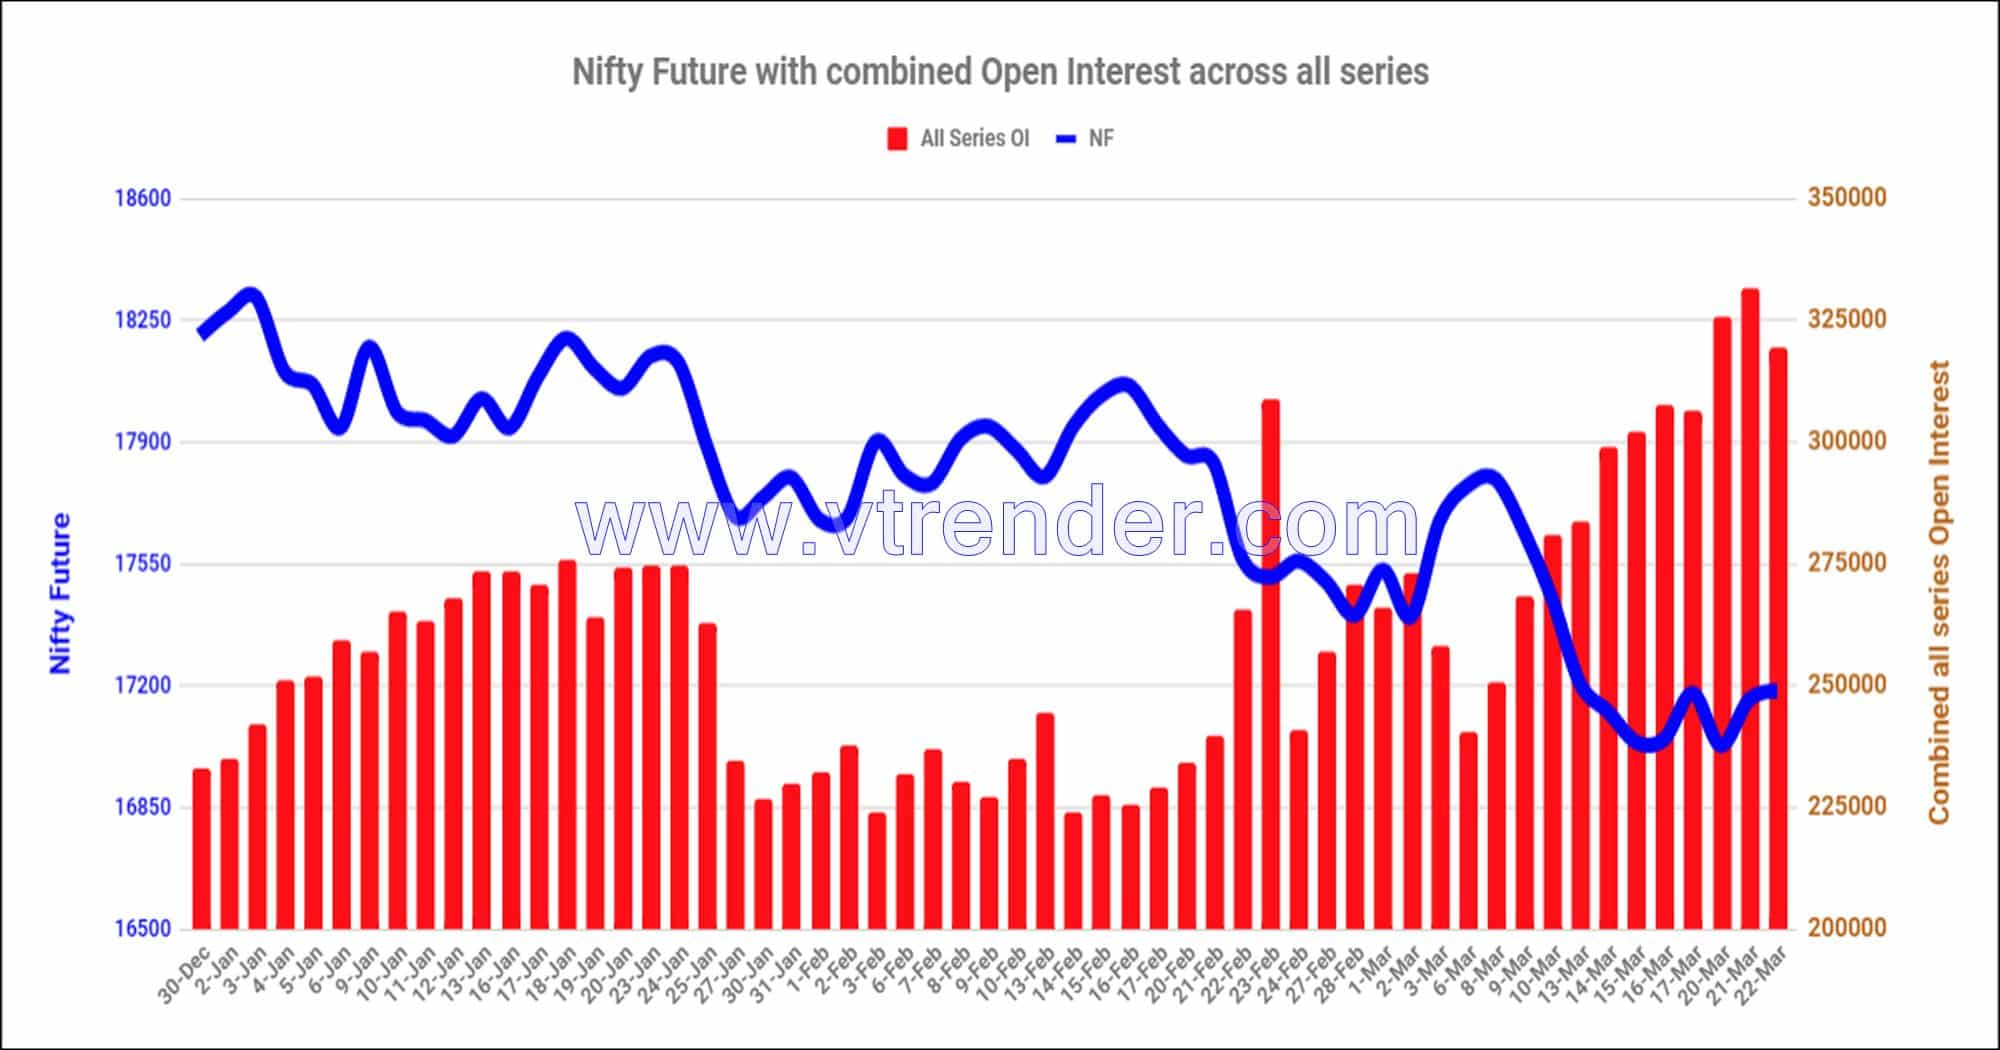 Nf22Mar Nifty And Banknifty Futures With All Series Combined Open Interest – 22Nd Mar 2023 Banknifty, Nifty, Open Interest